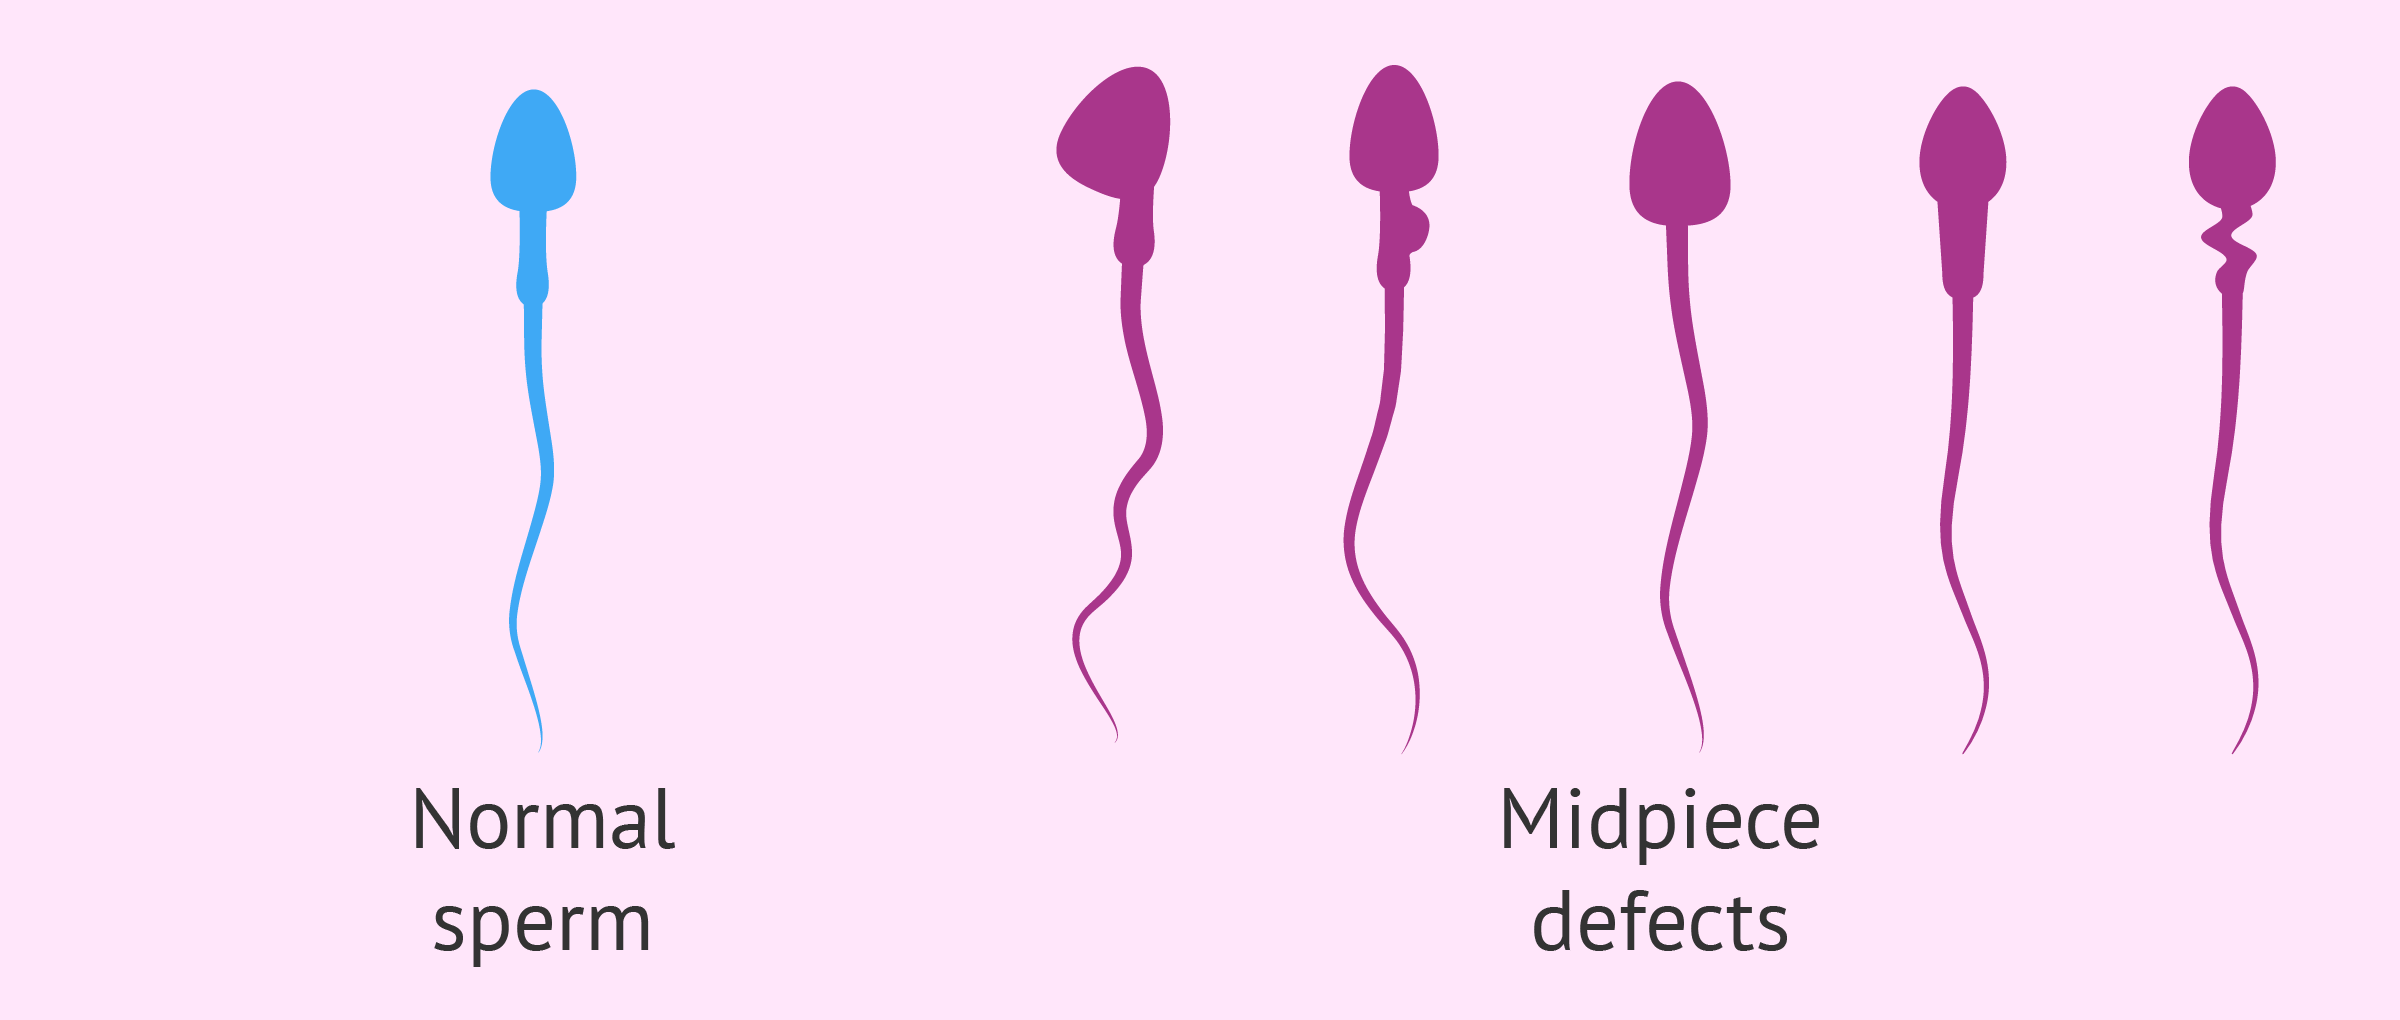 Midpiece defects in sperm